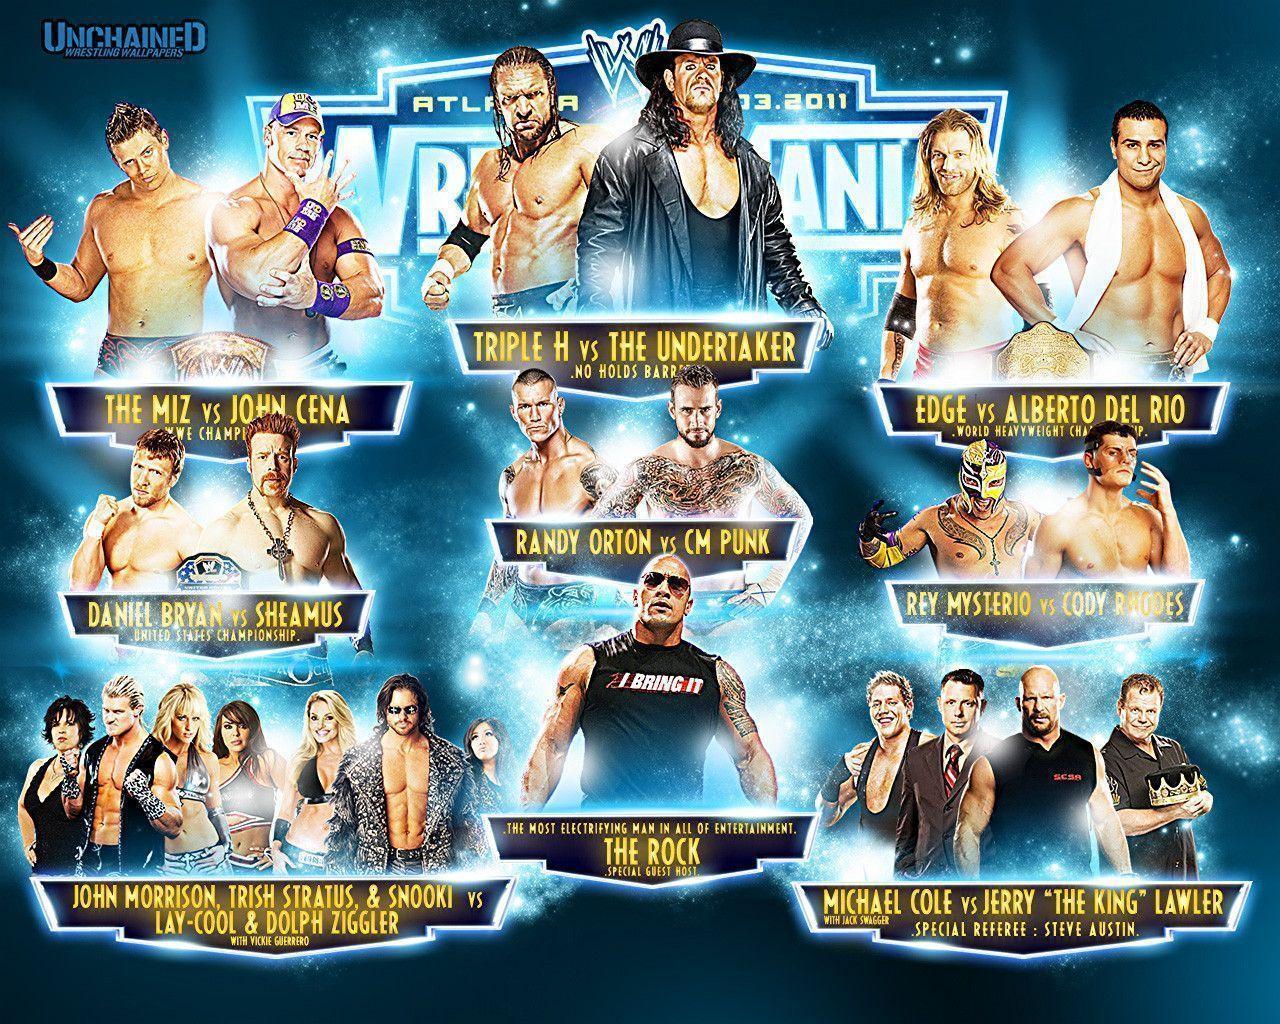 WWE WrestleMania 27 "Complete Matchcard" Wallpaper Unchained WWE